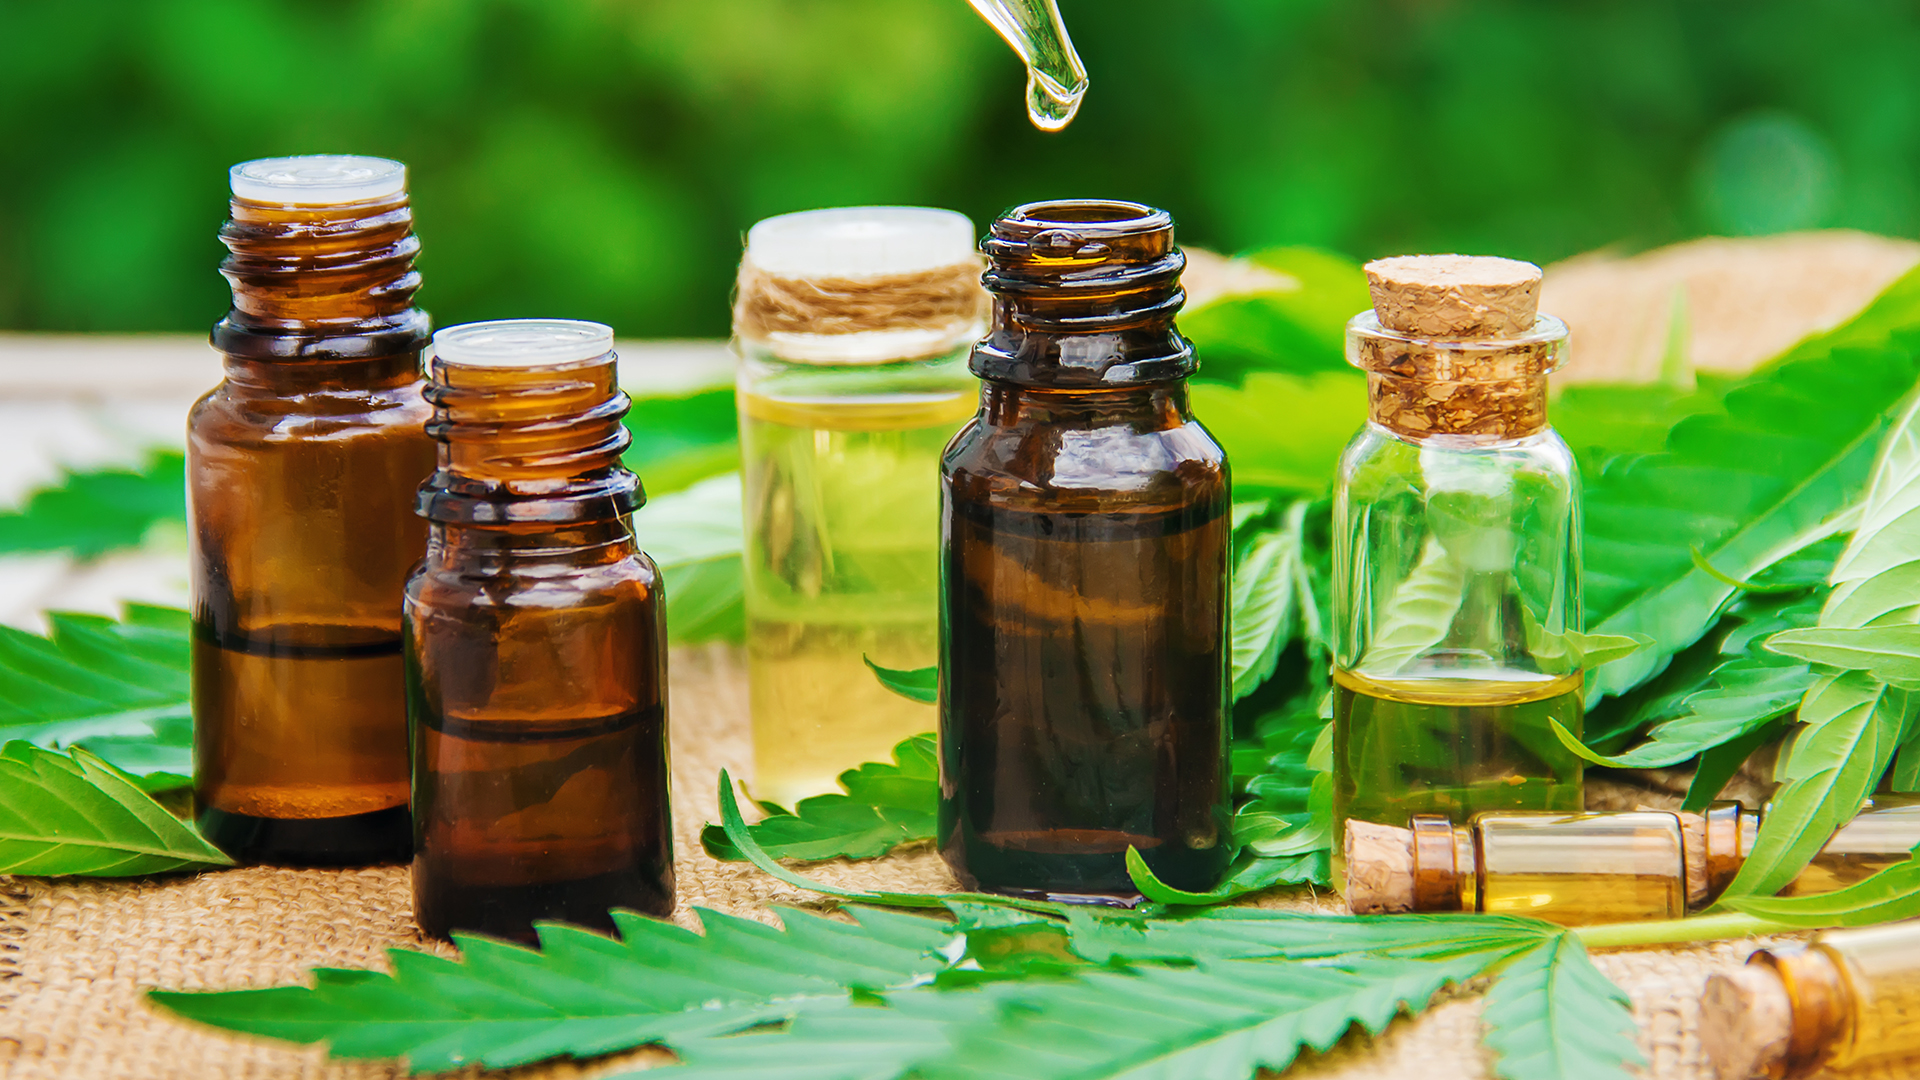 Daily Dose - Can CBD Oil Provide Health Help Without the High?